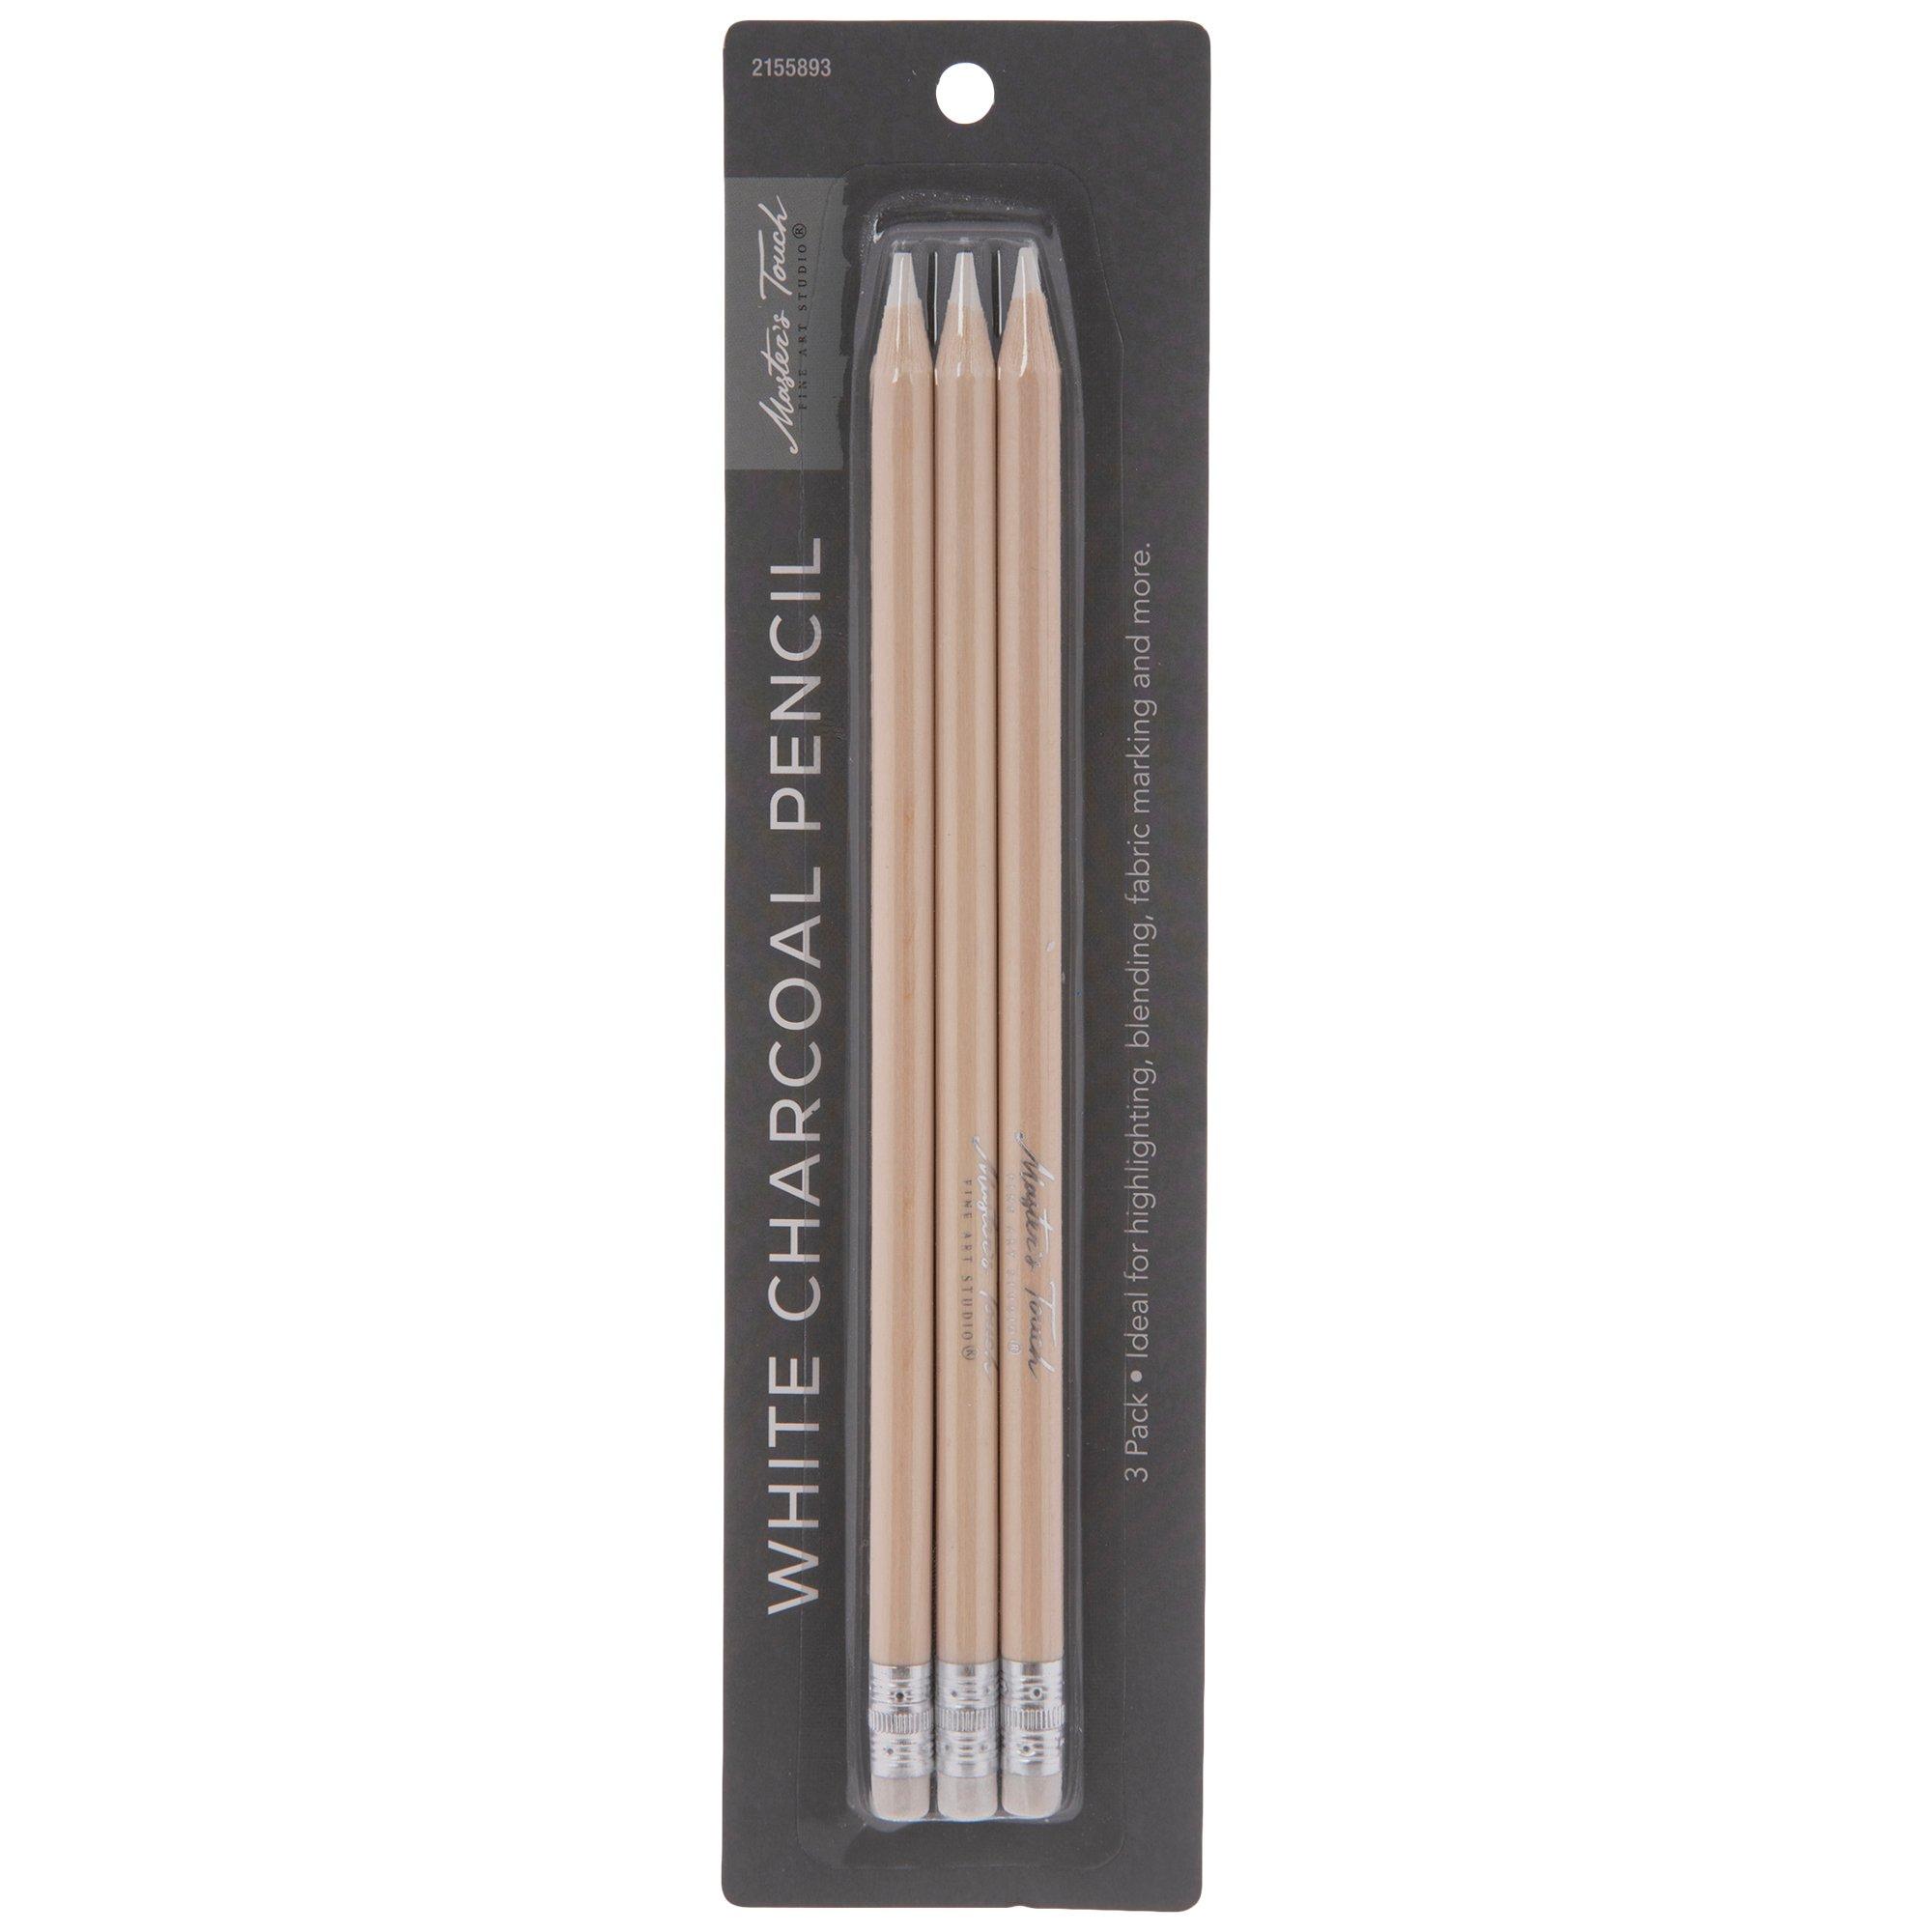 The Fine Touch Sketching Pencils - 12 Piece Set, Hobby Lobby